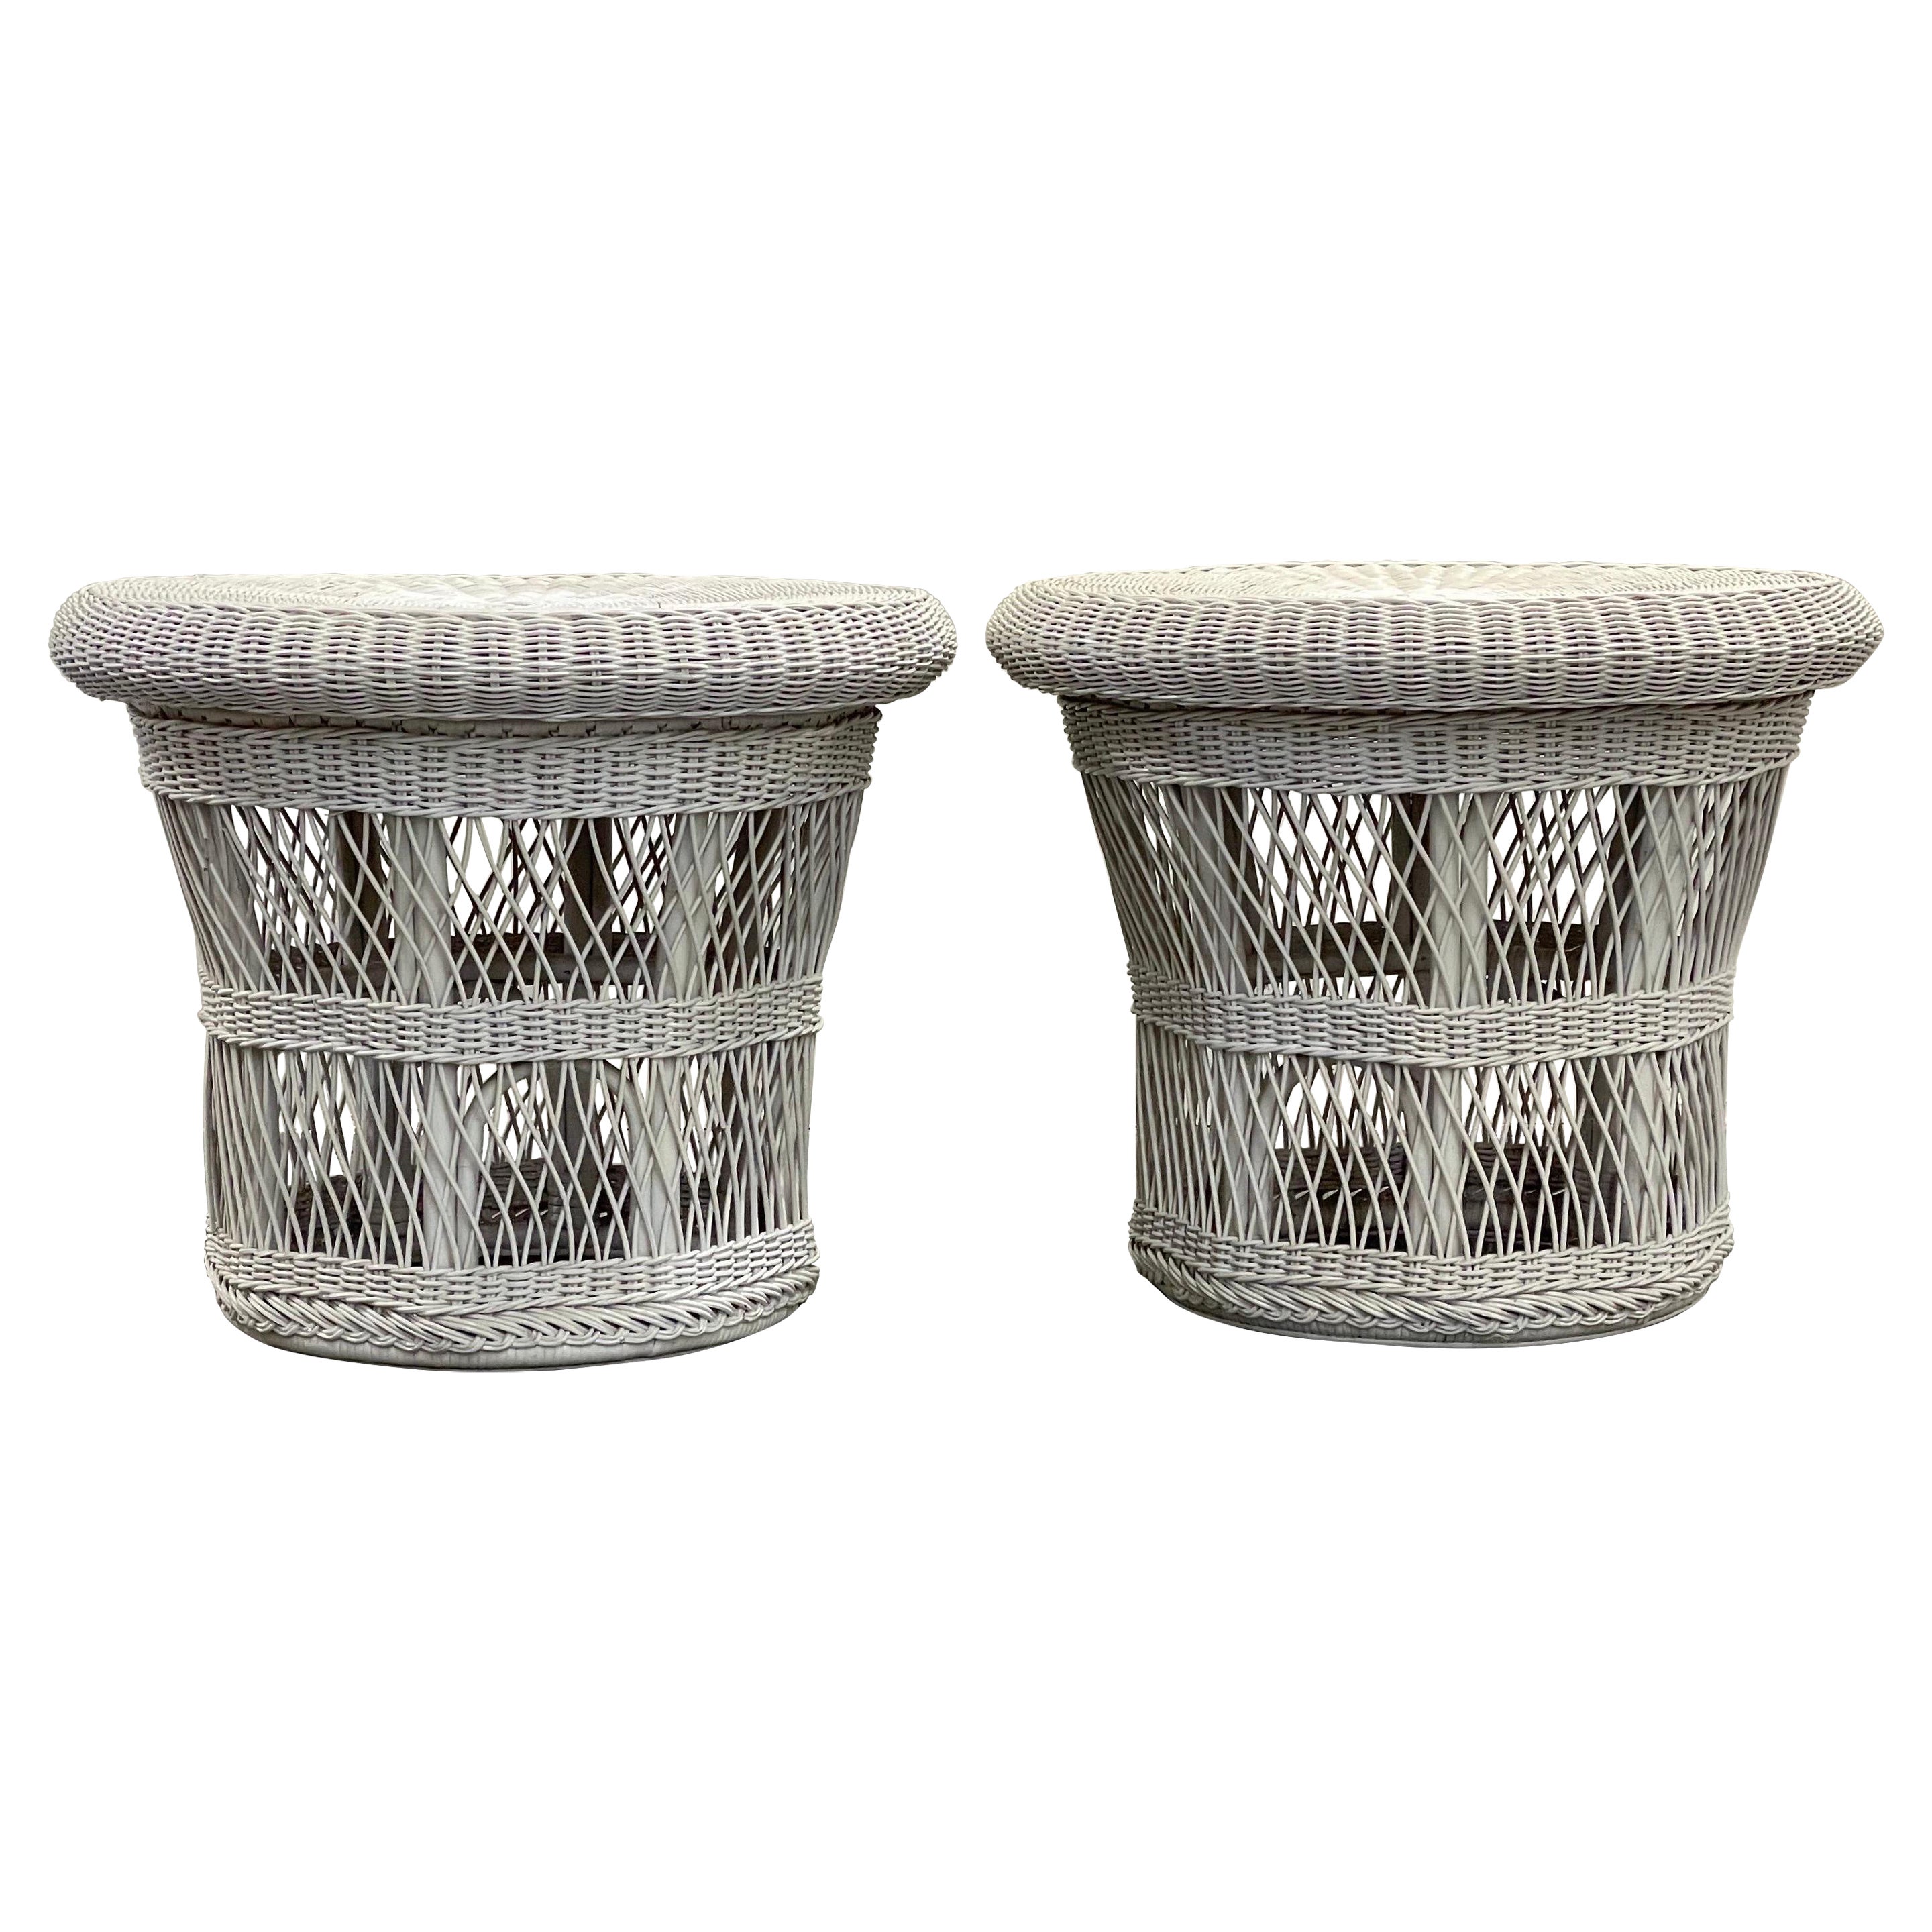 Vintage Wicker Side Tables with Tray Tops, a Pair